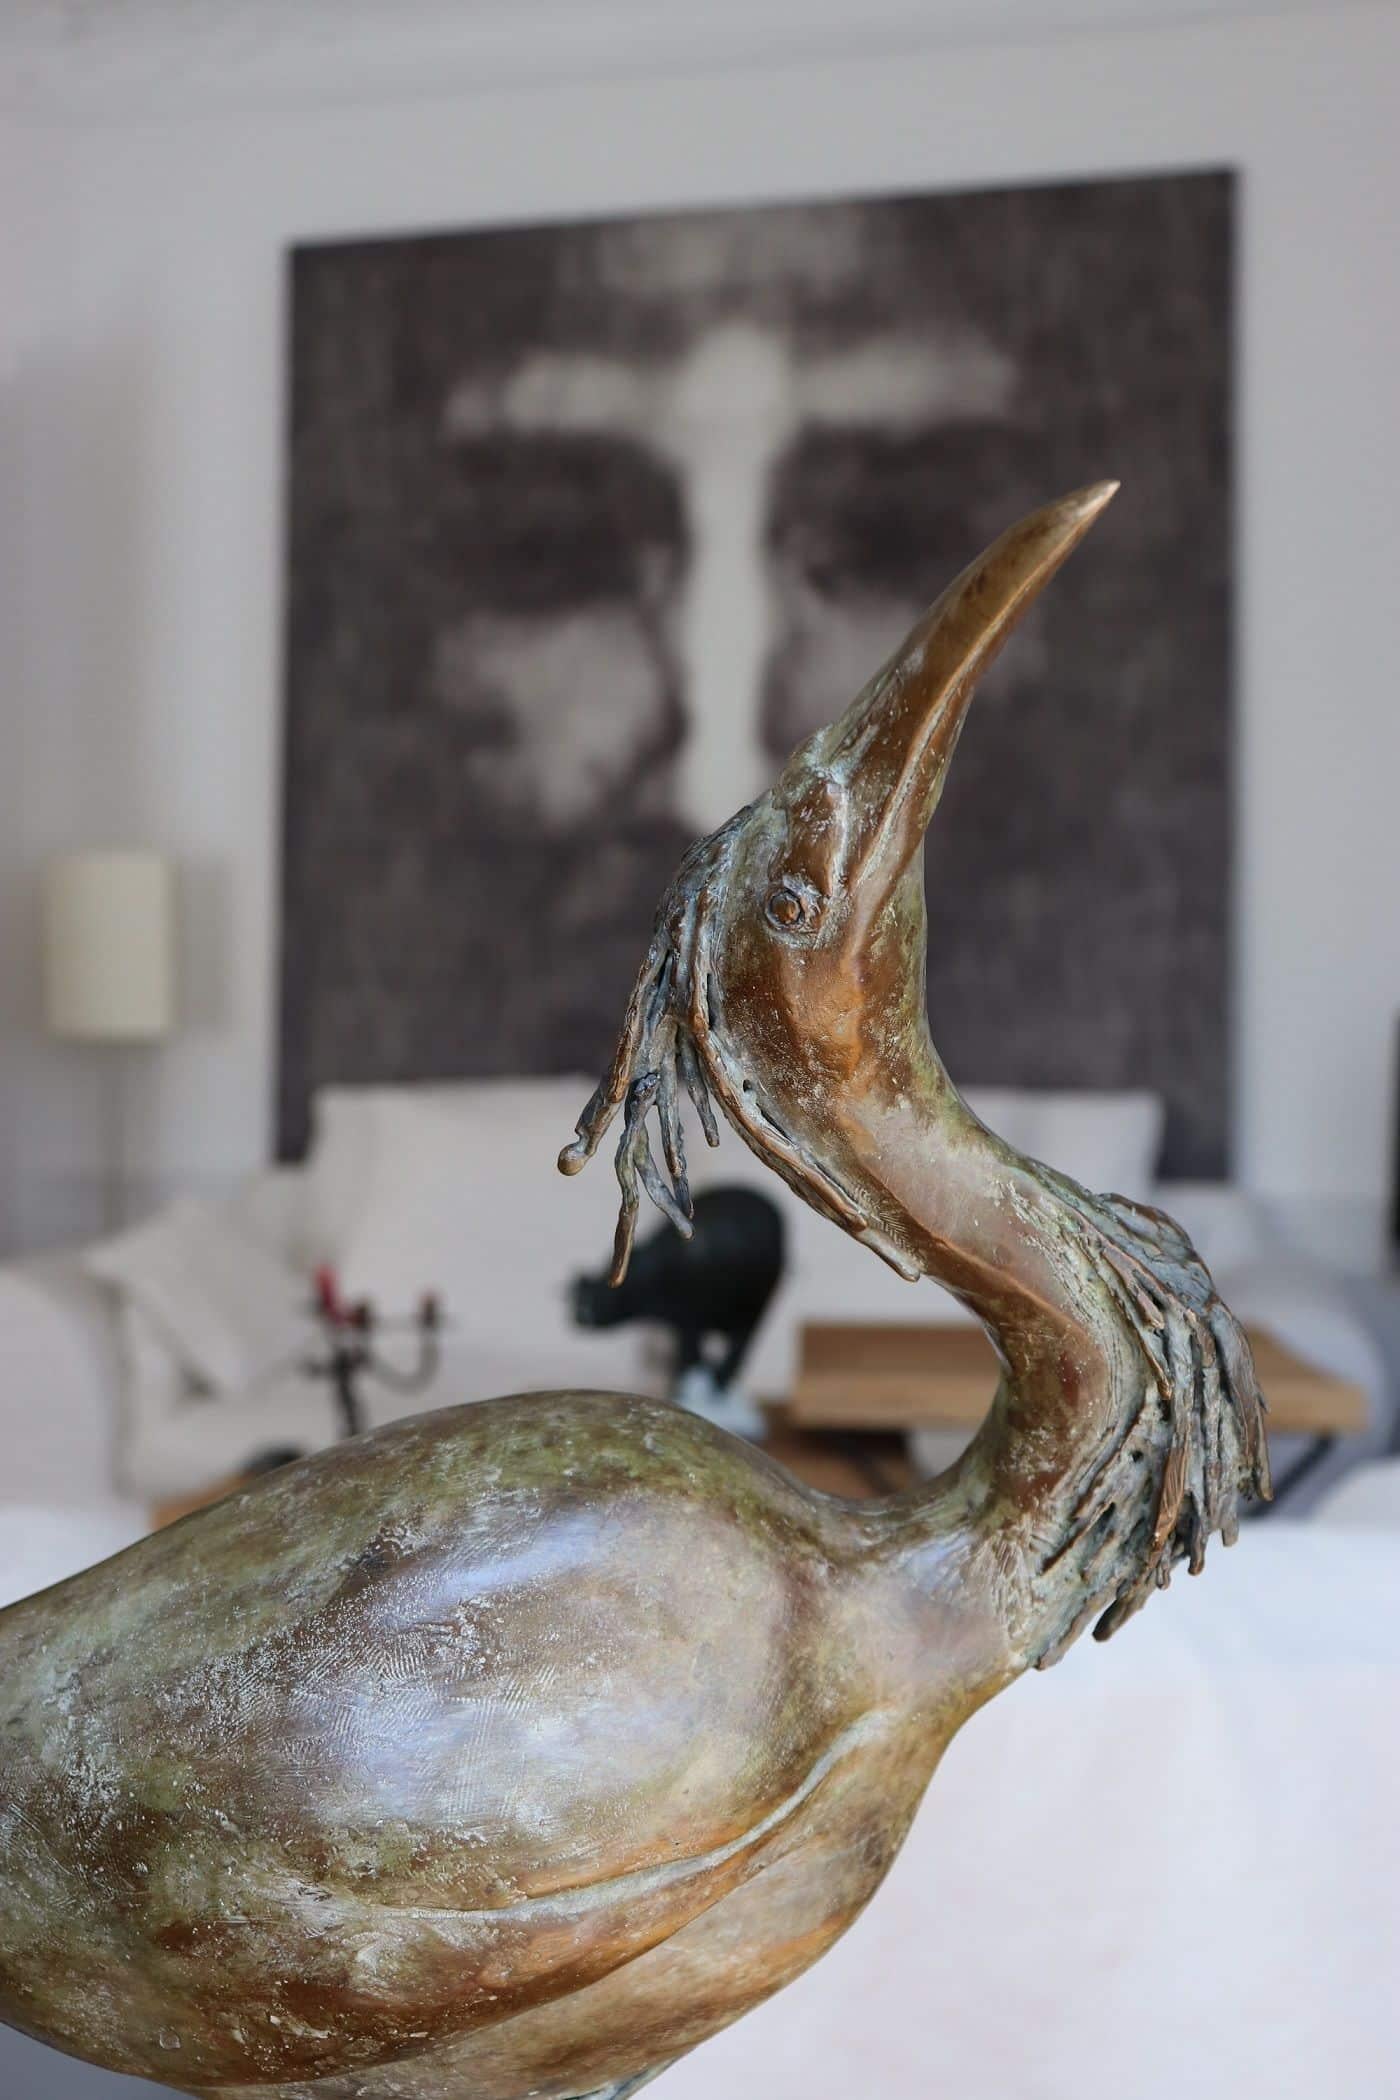 Egret by Chésade - Bronze animal sculpture of a bird, realistic, expressive For Sale 6